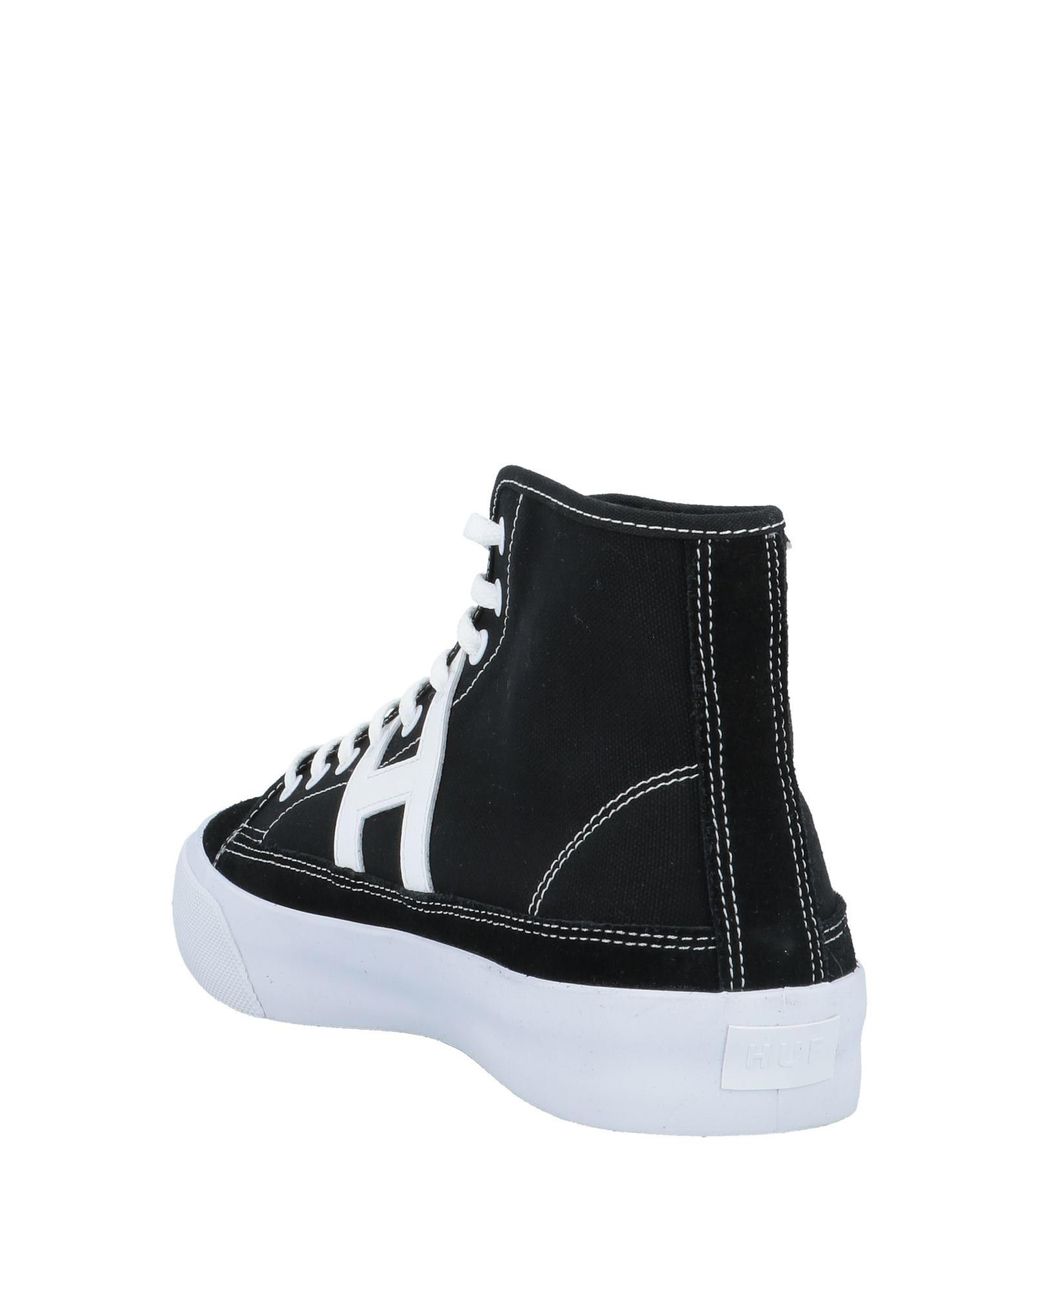 Huf Canvas High-tops & Sneakers in Black for Men | Lyst